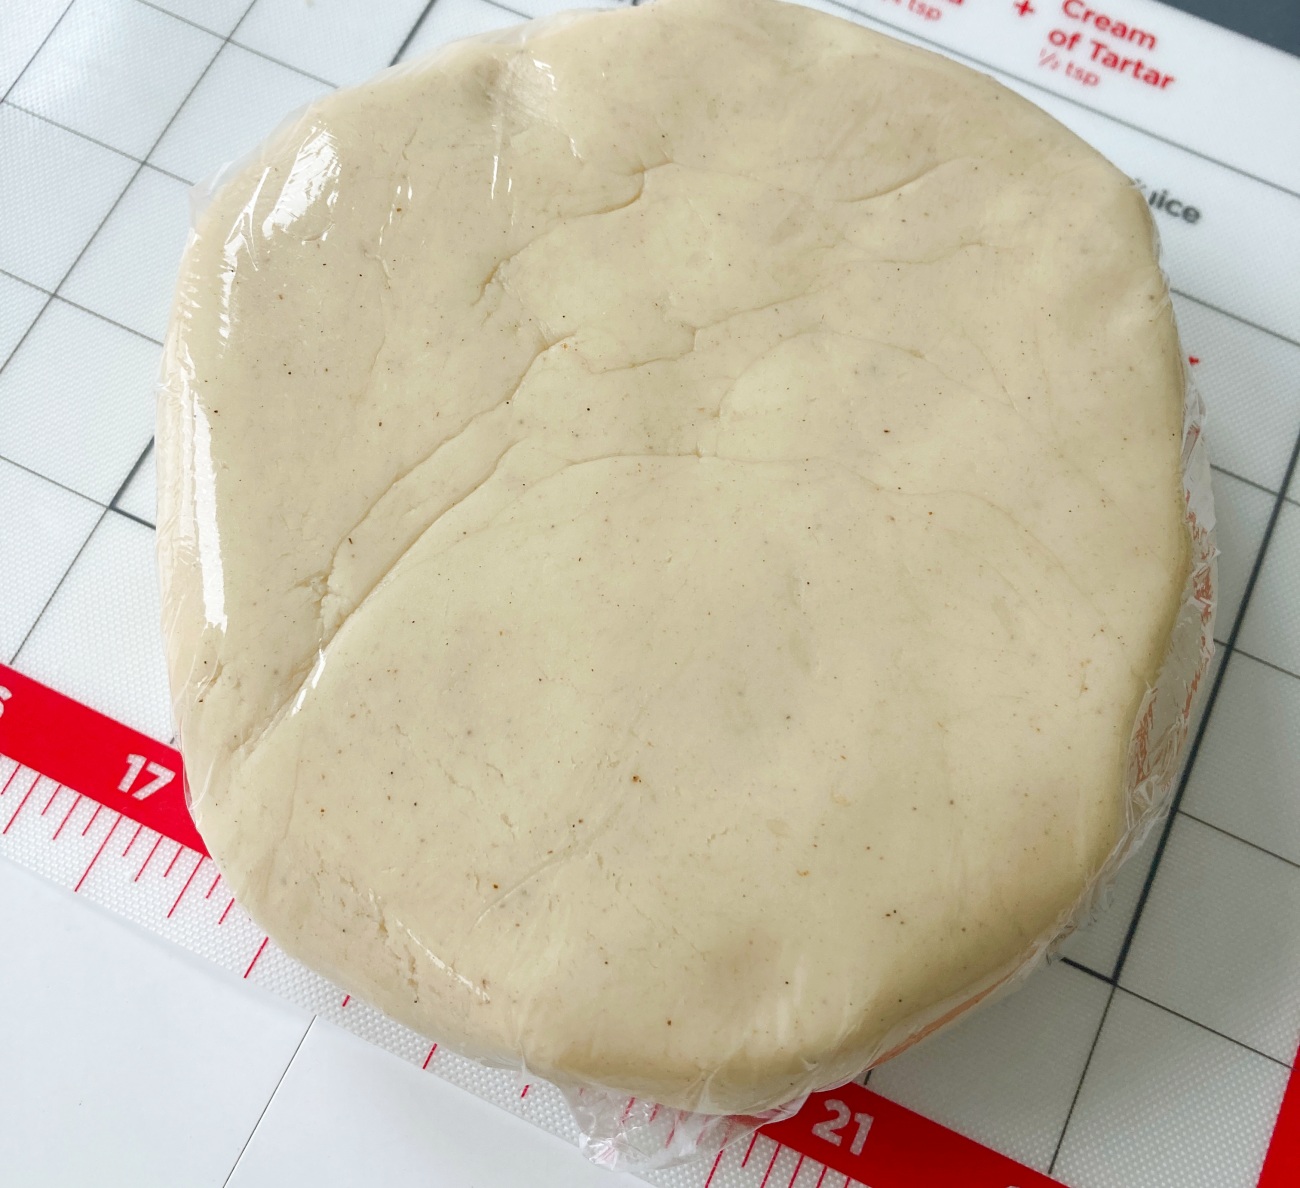 Knead for 1 minute before forming into a disk. Wrap with plastic wrap and refrigerate for 15-30 minutes.